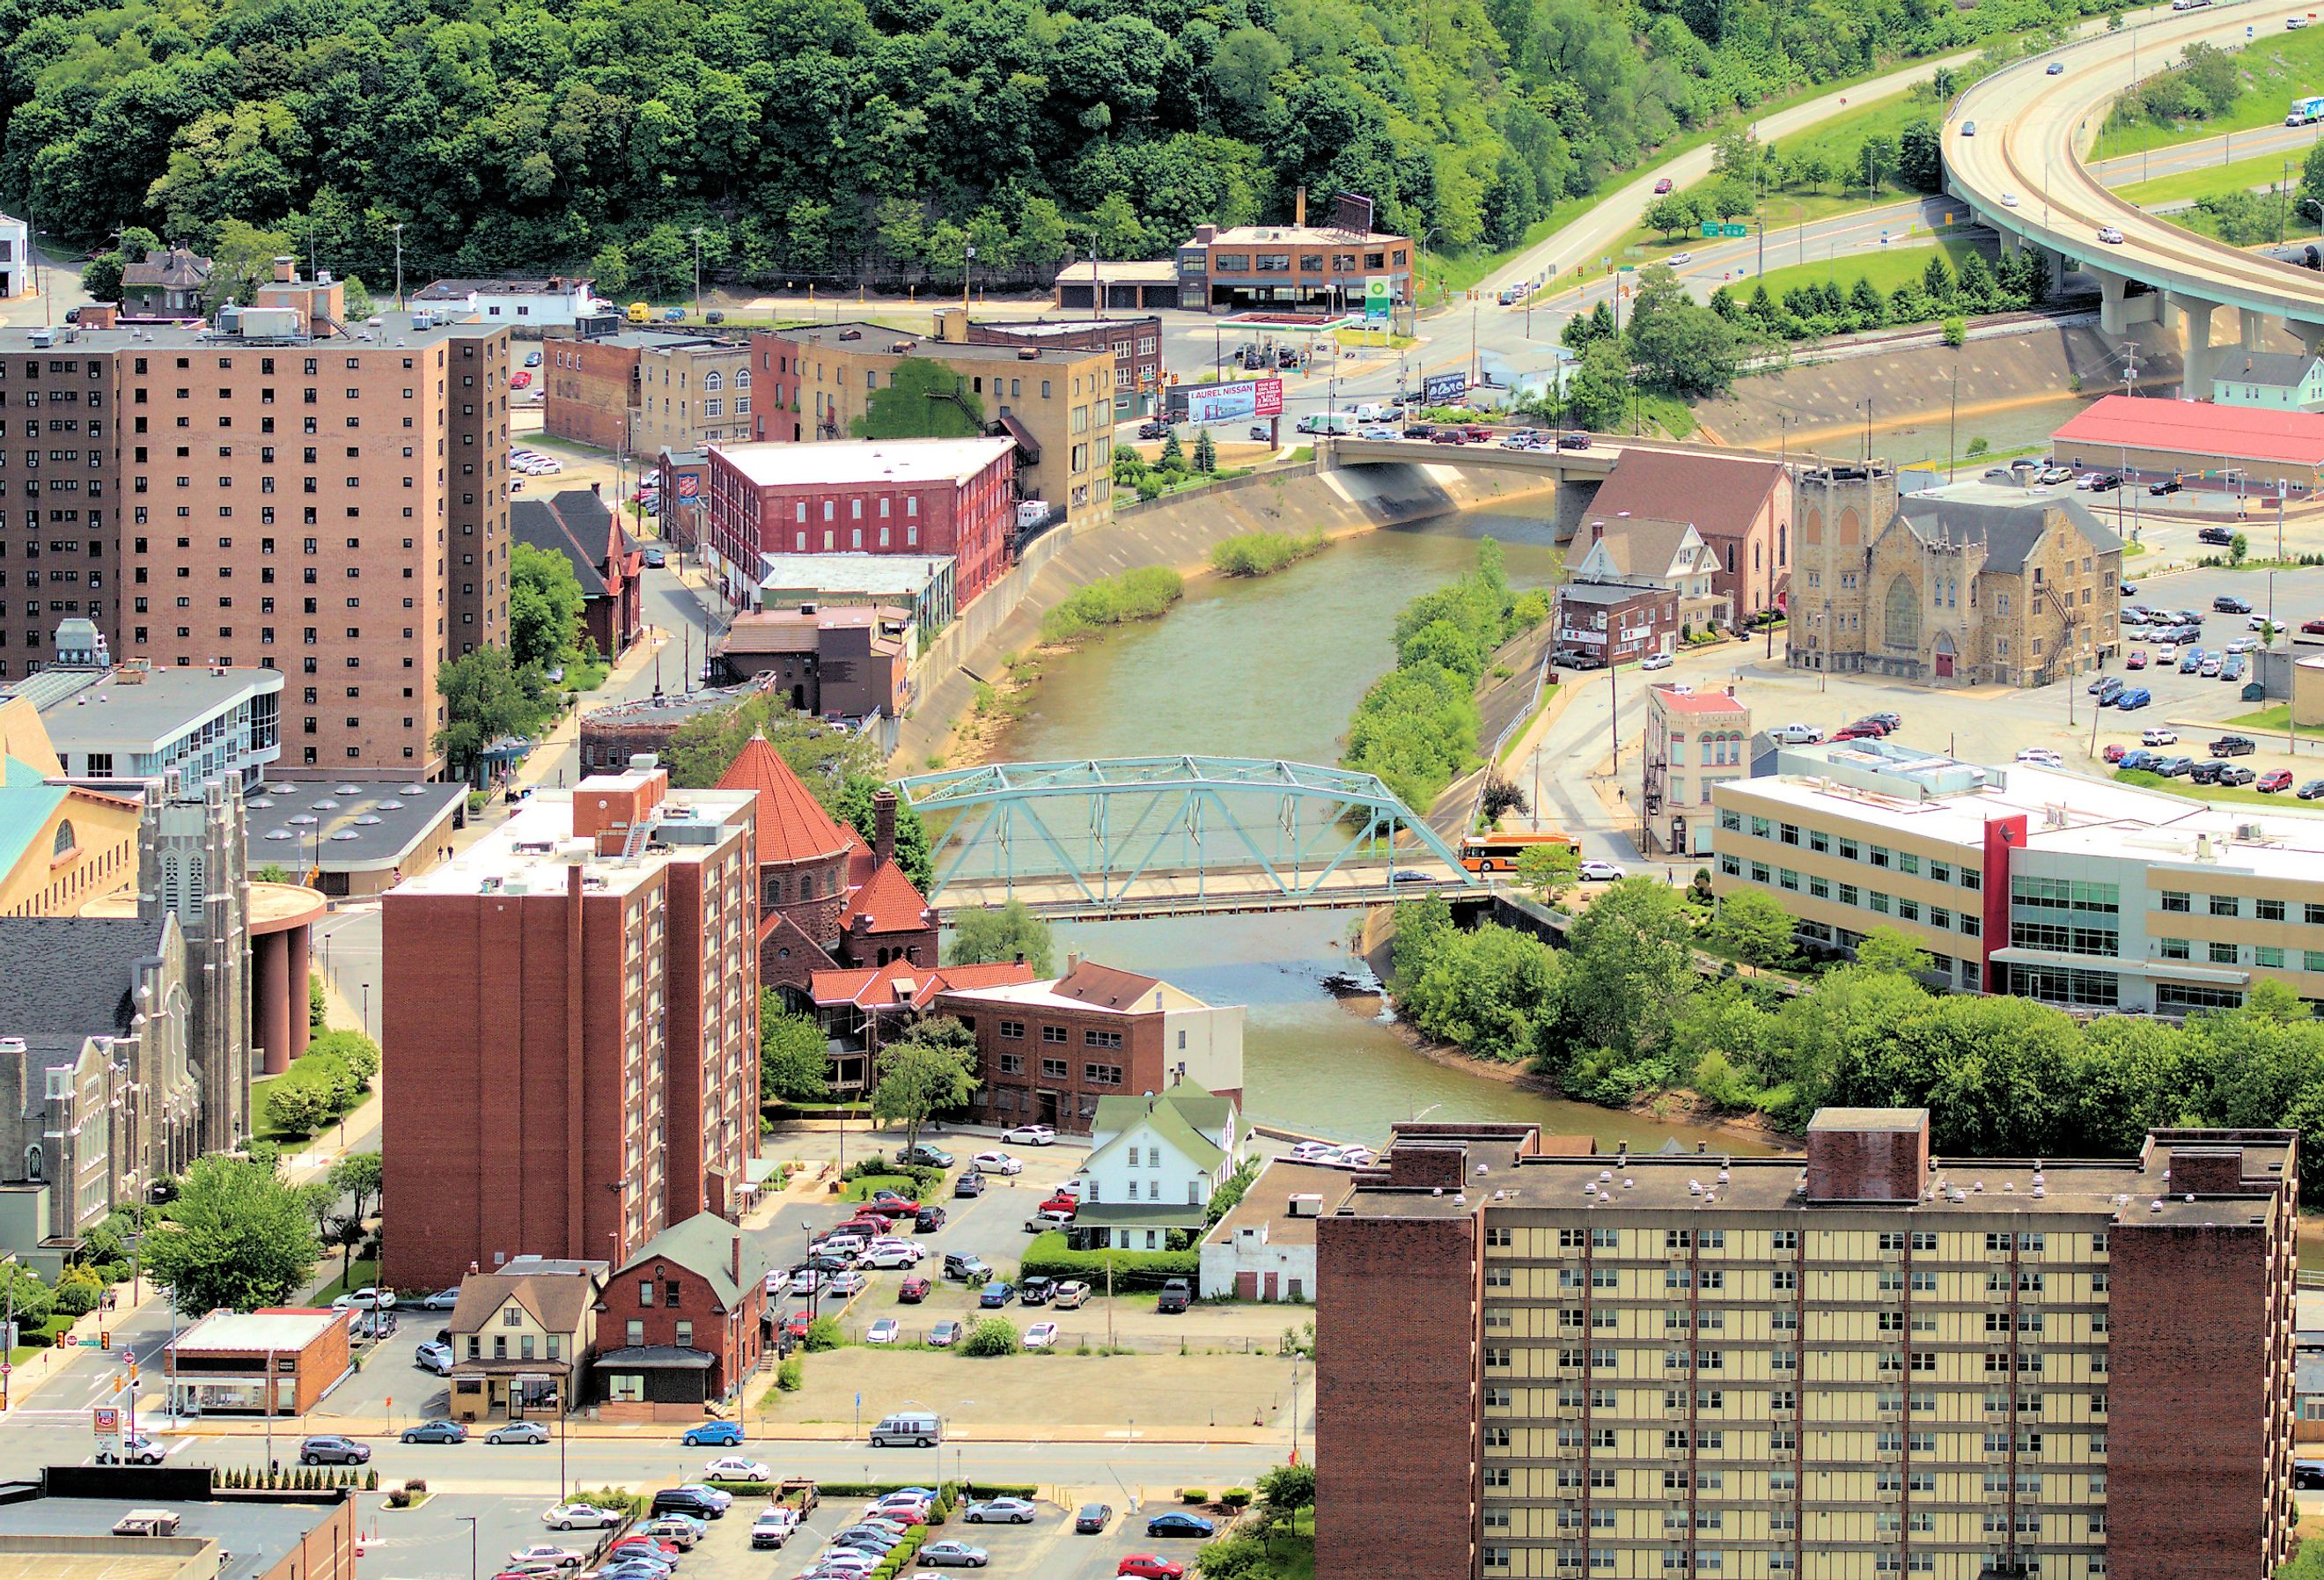 A view of downtown Johnstown, Pennsylvania as seen from the Inclined Plane. Image credit GalPhotos via Shutterstock